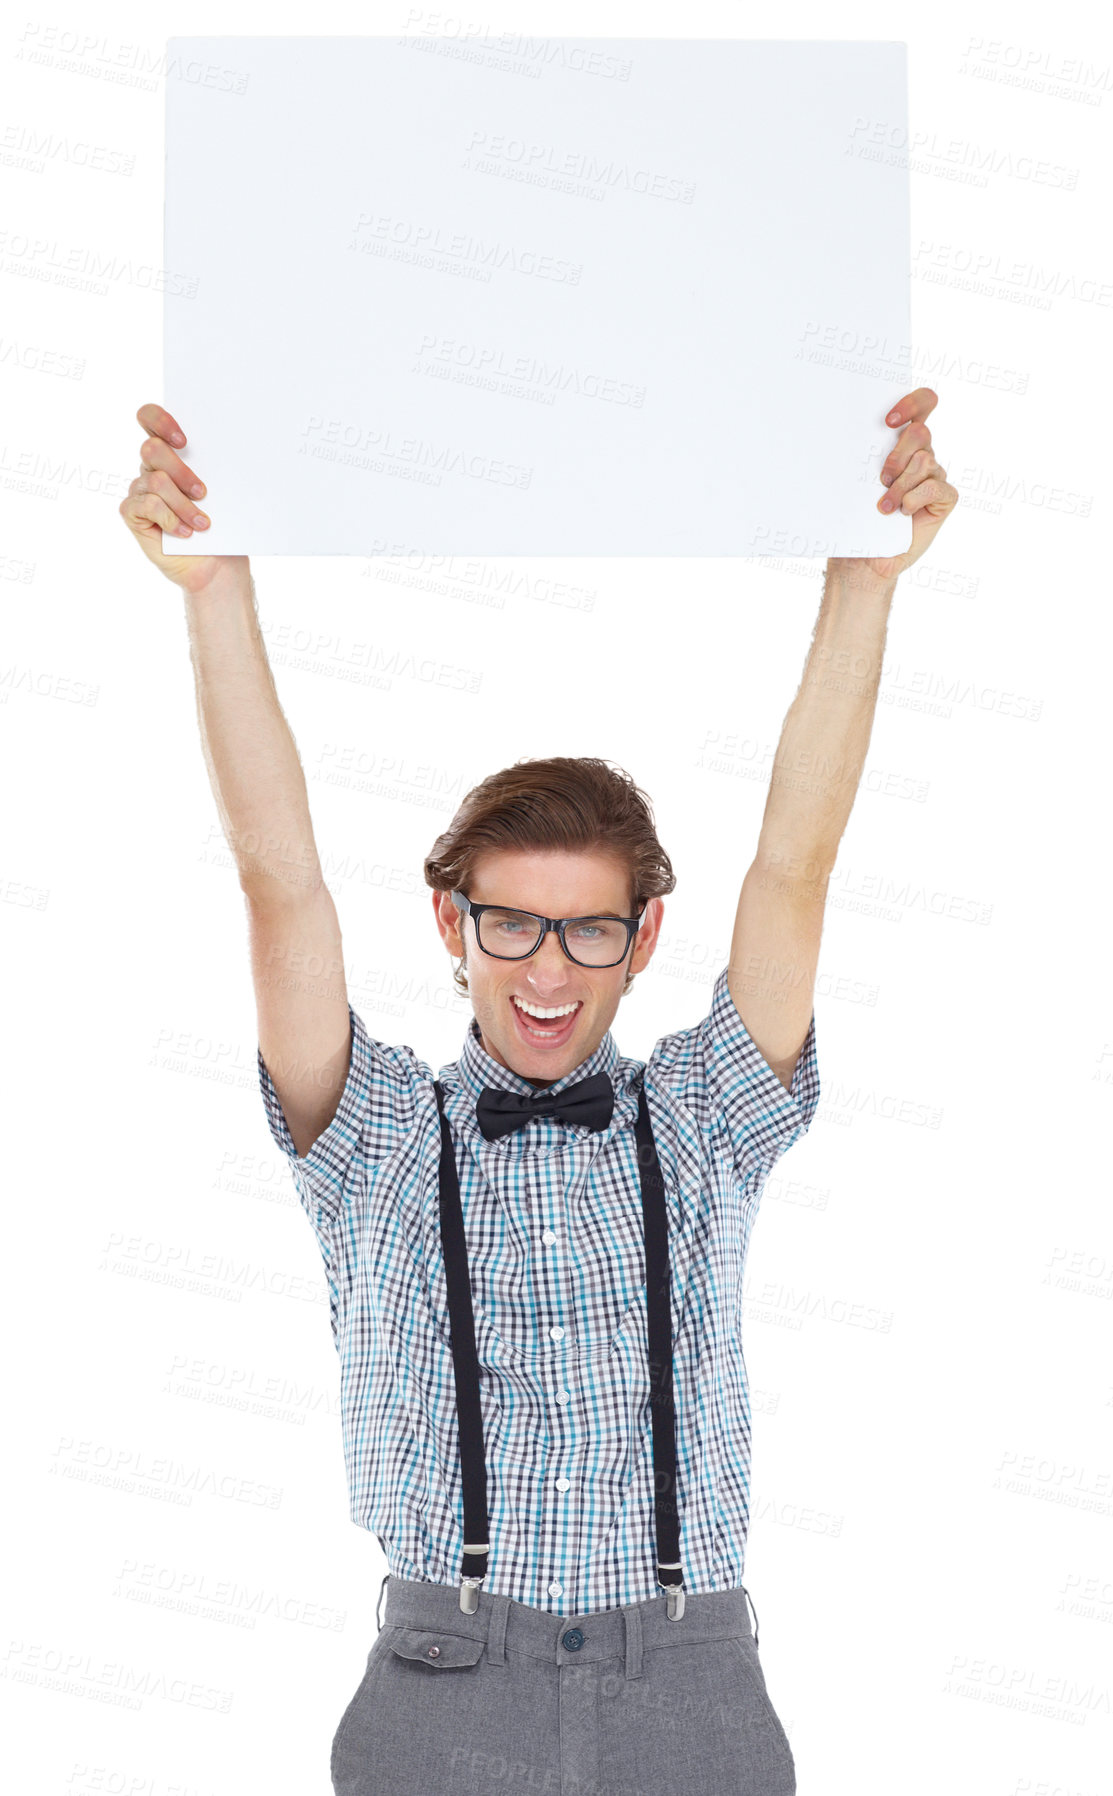 Buy stock photo Portrait of an excited young man holding up a white sign